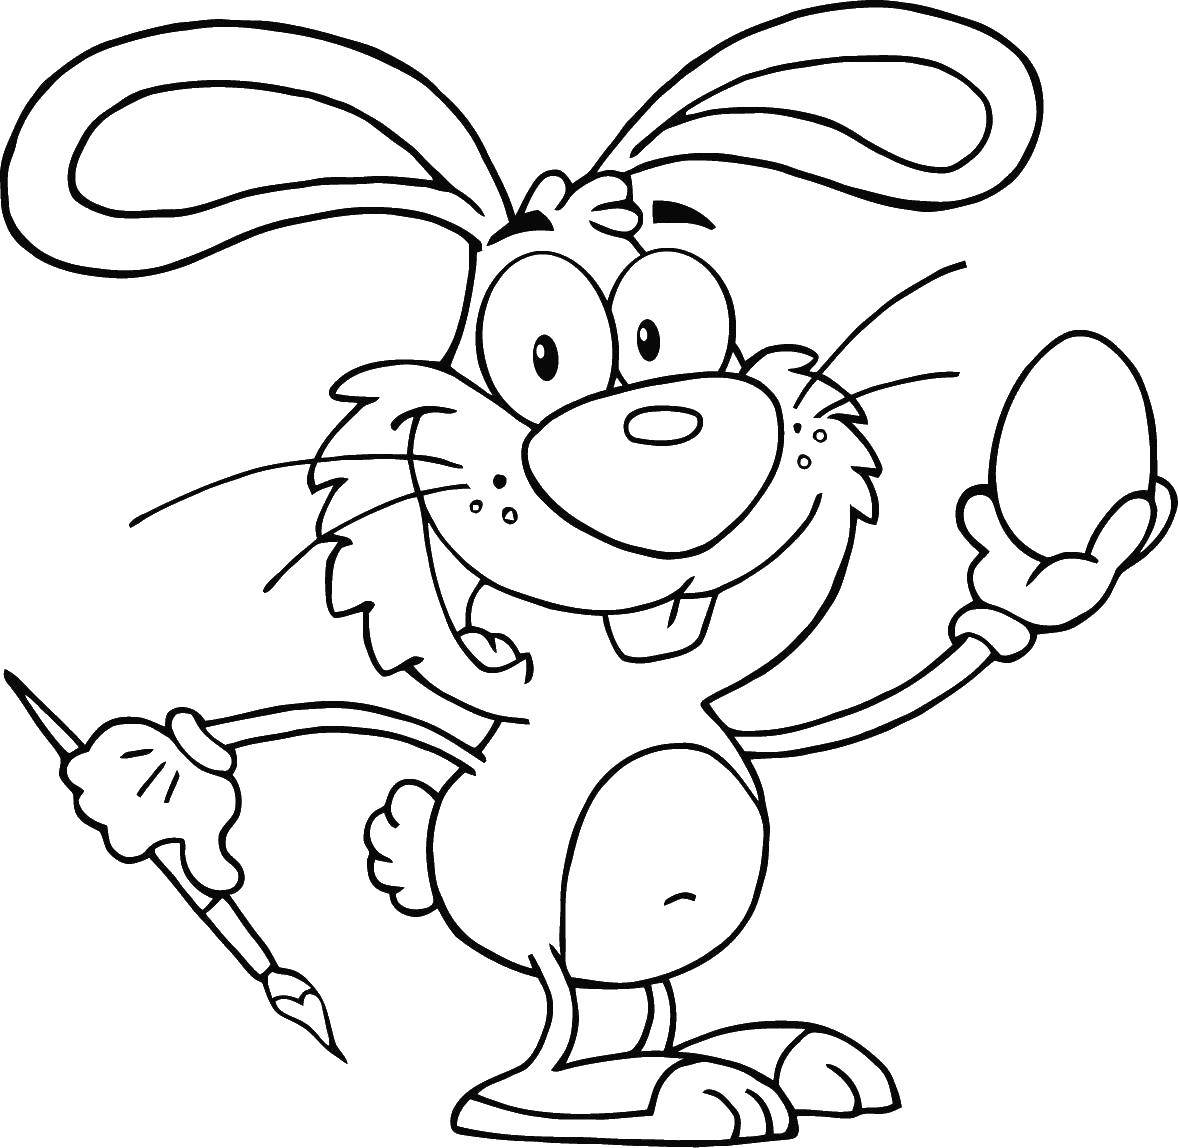 Coloring Rabbit with egg and tassel. Category the rabbit. Tags:  Bunny, egg, brush.